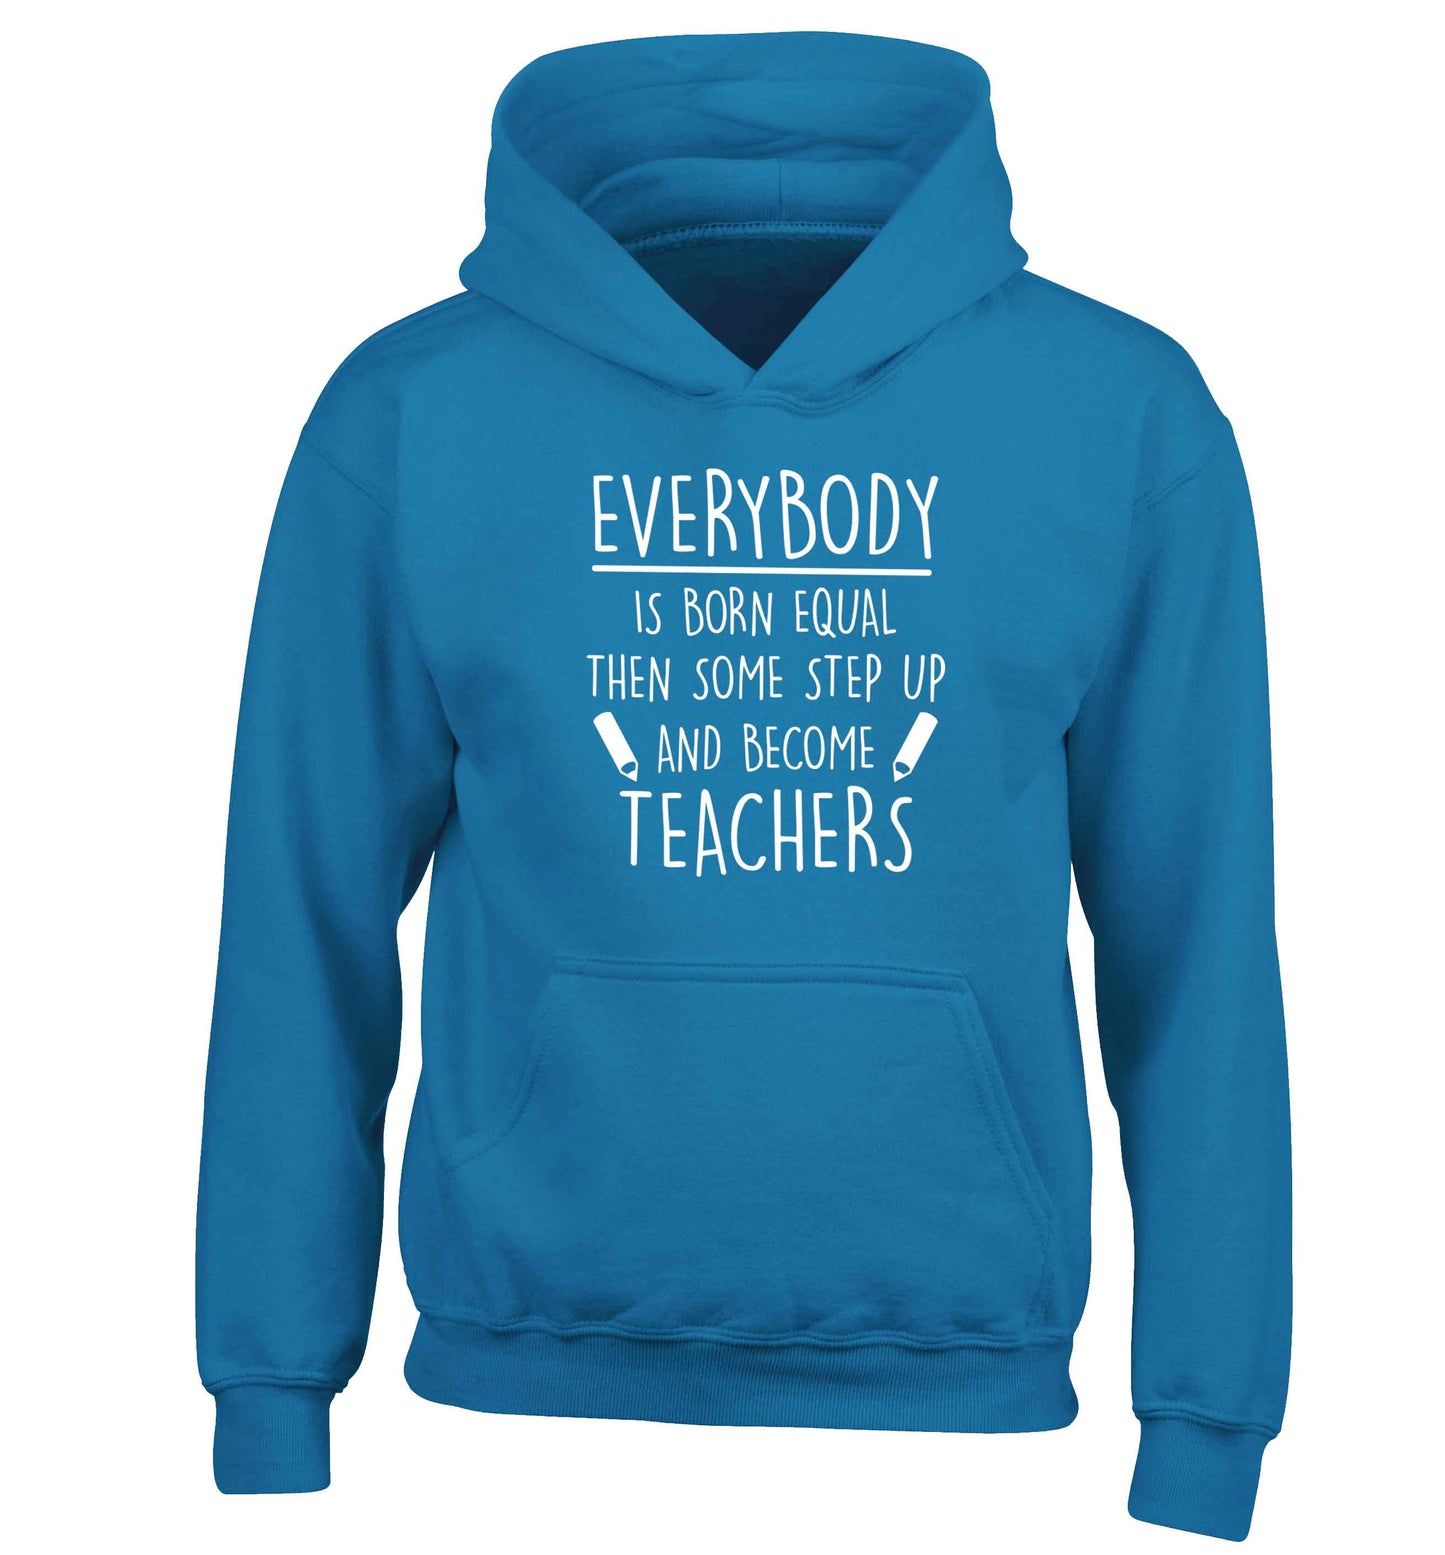 Everybody is born equal then some step up and become teachers children's blue hoodie 12-13 Years